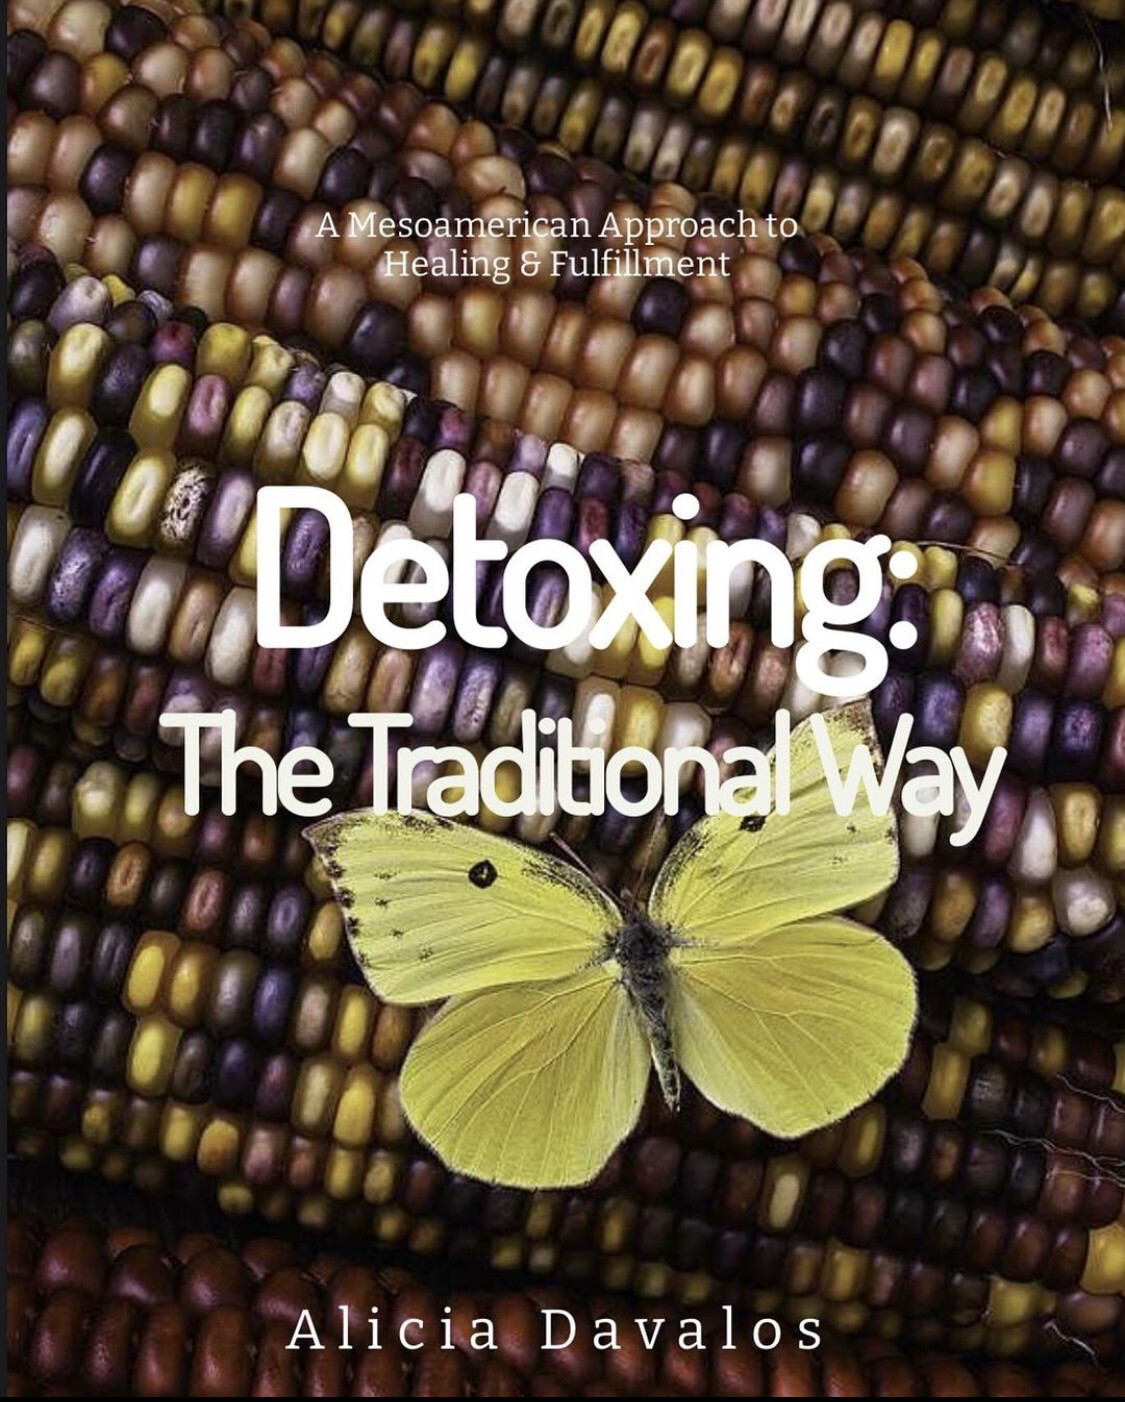 Detoxing: The Traditional Way